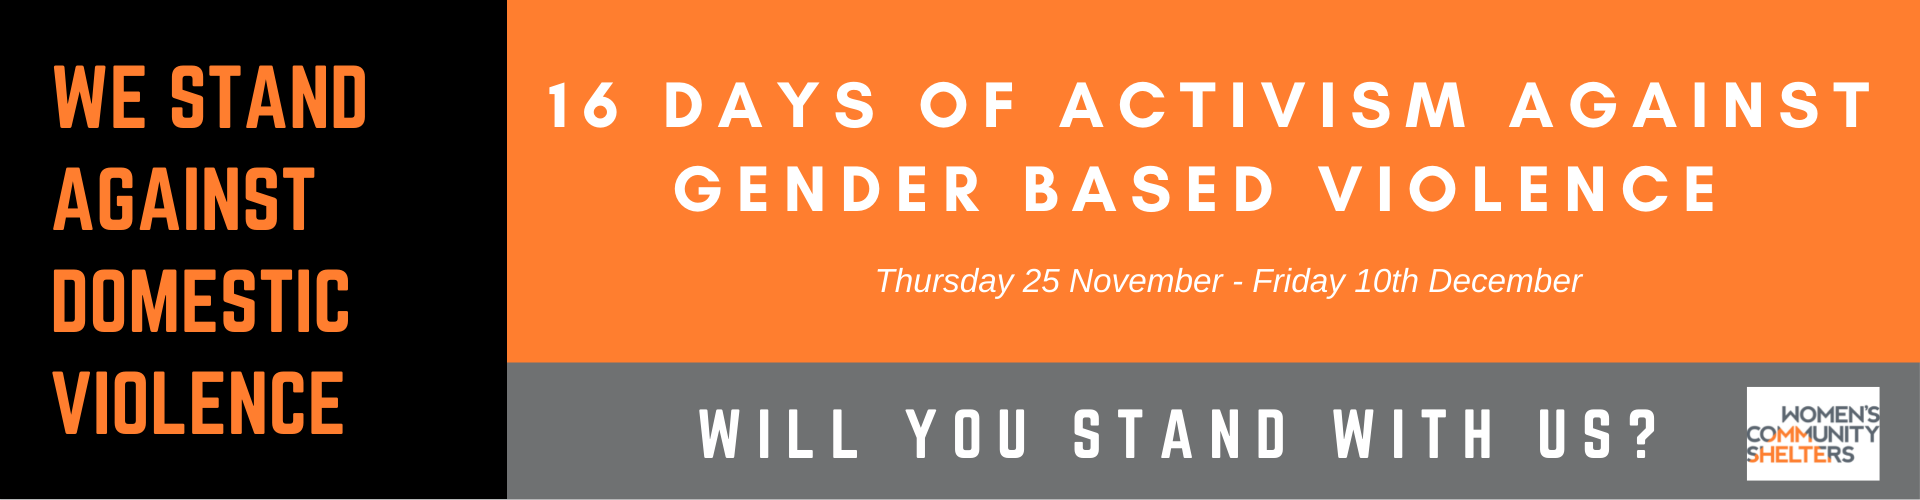 16 Days of Activism Campaign